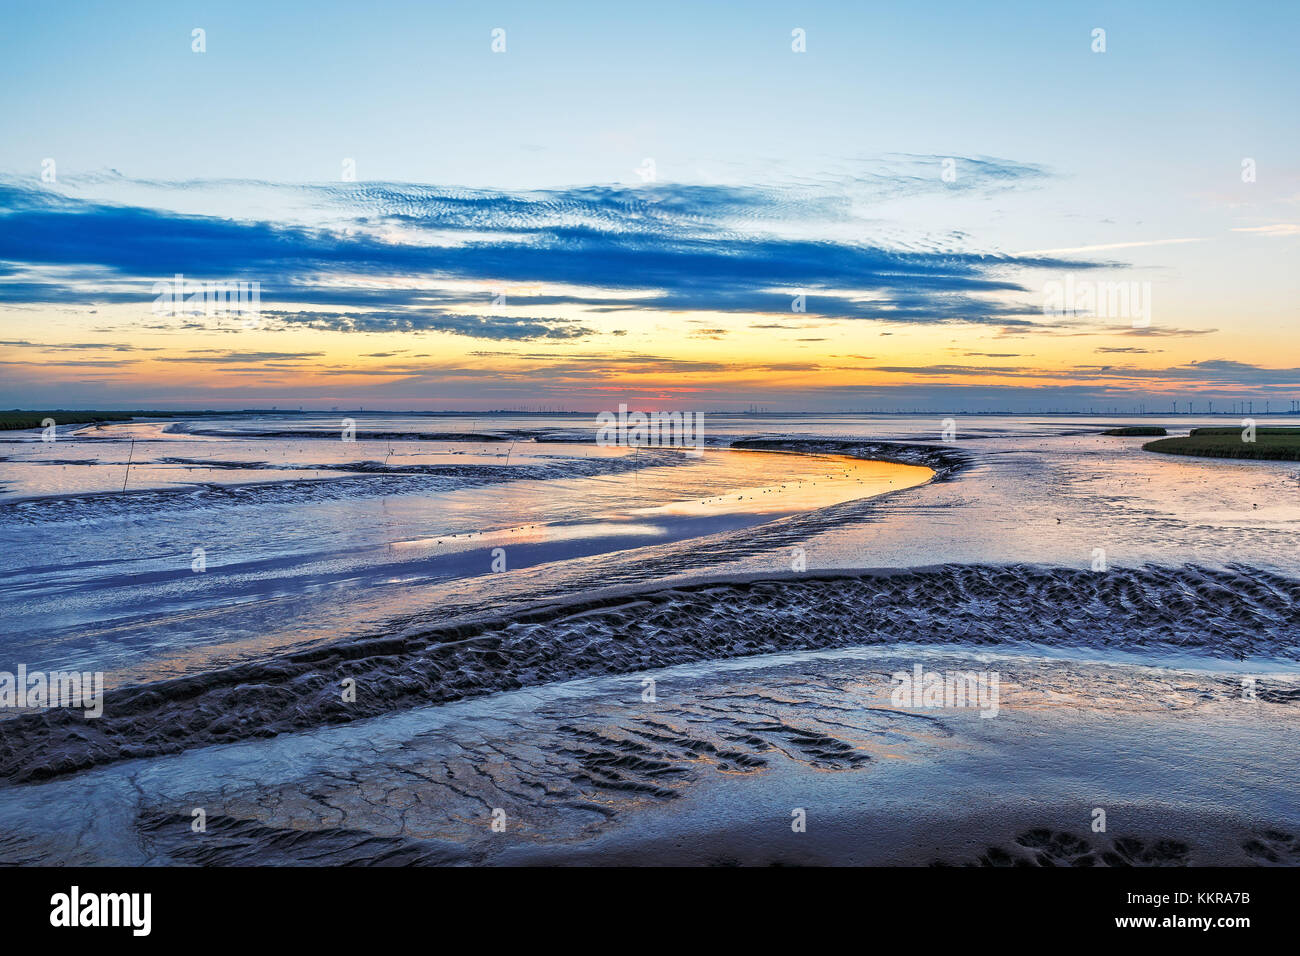 The Dollart, a bay in the wadden sea between the northern Netherlands and Germany Stock Photo